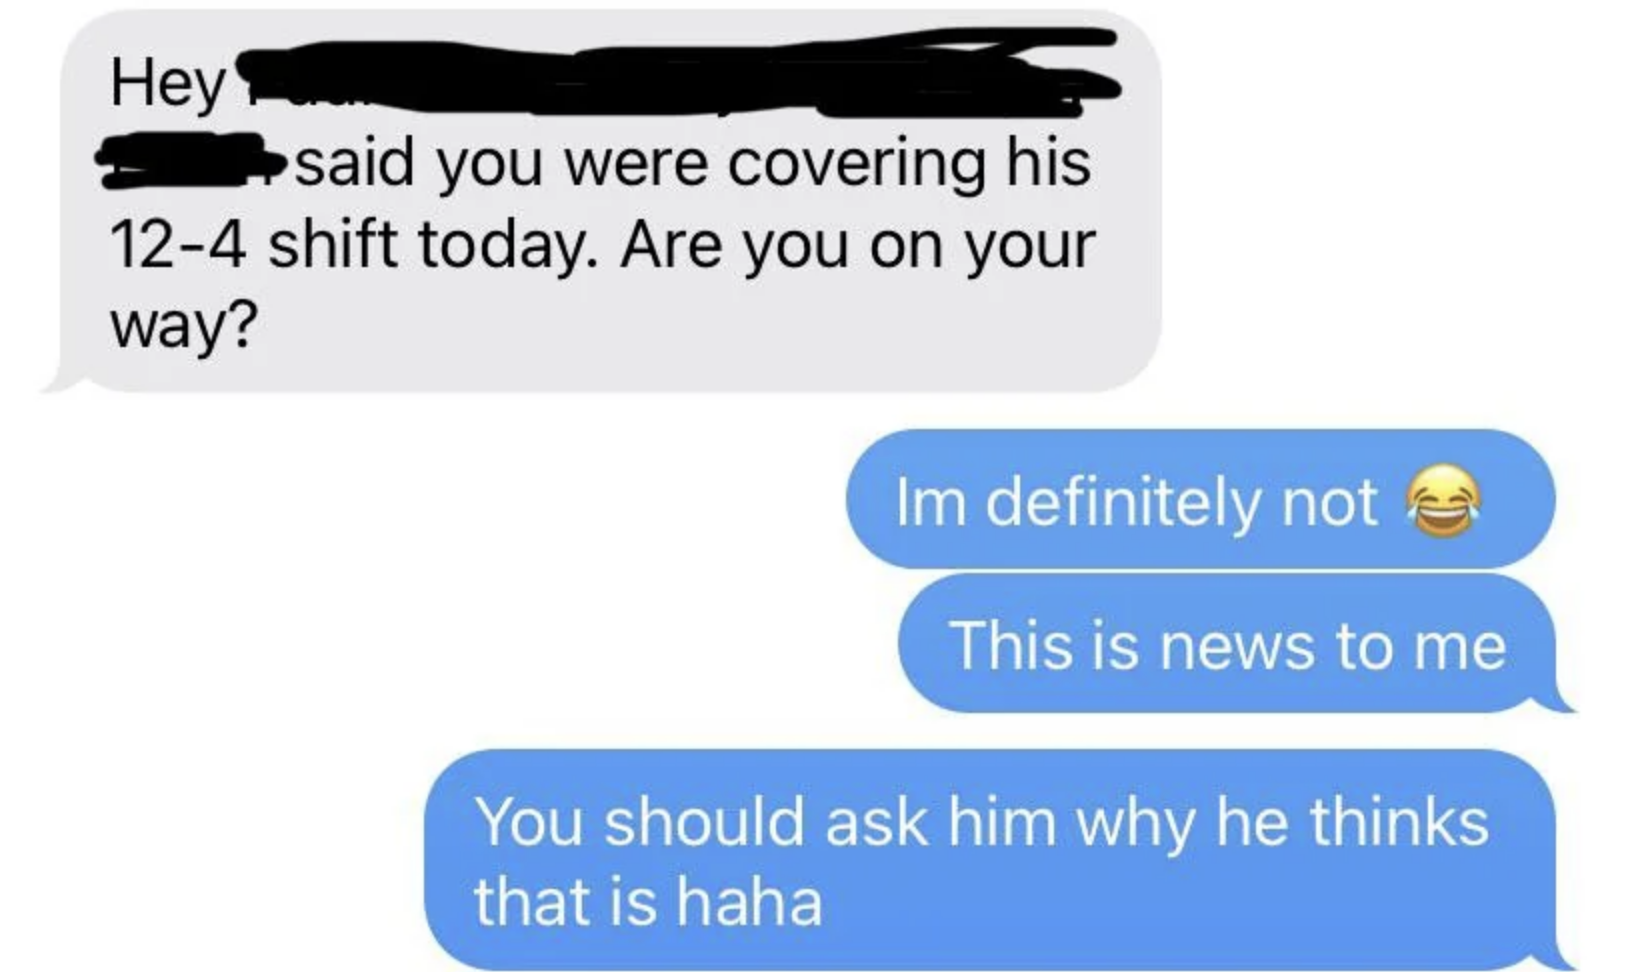 Boss says another employee said they were covering his shift and asks if they&#x27;re on their way, and employee says &quot;definitely not&quot; and &quot;this is news to me&quot;